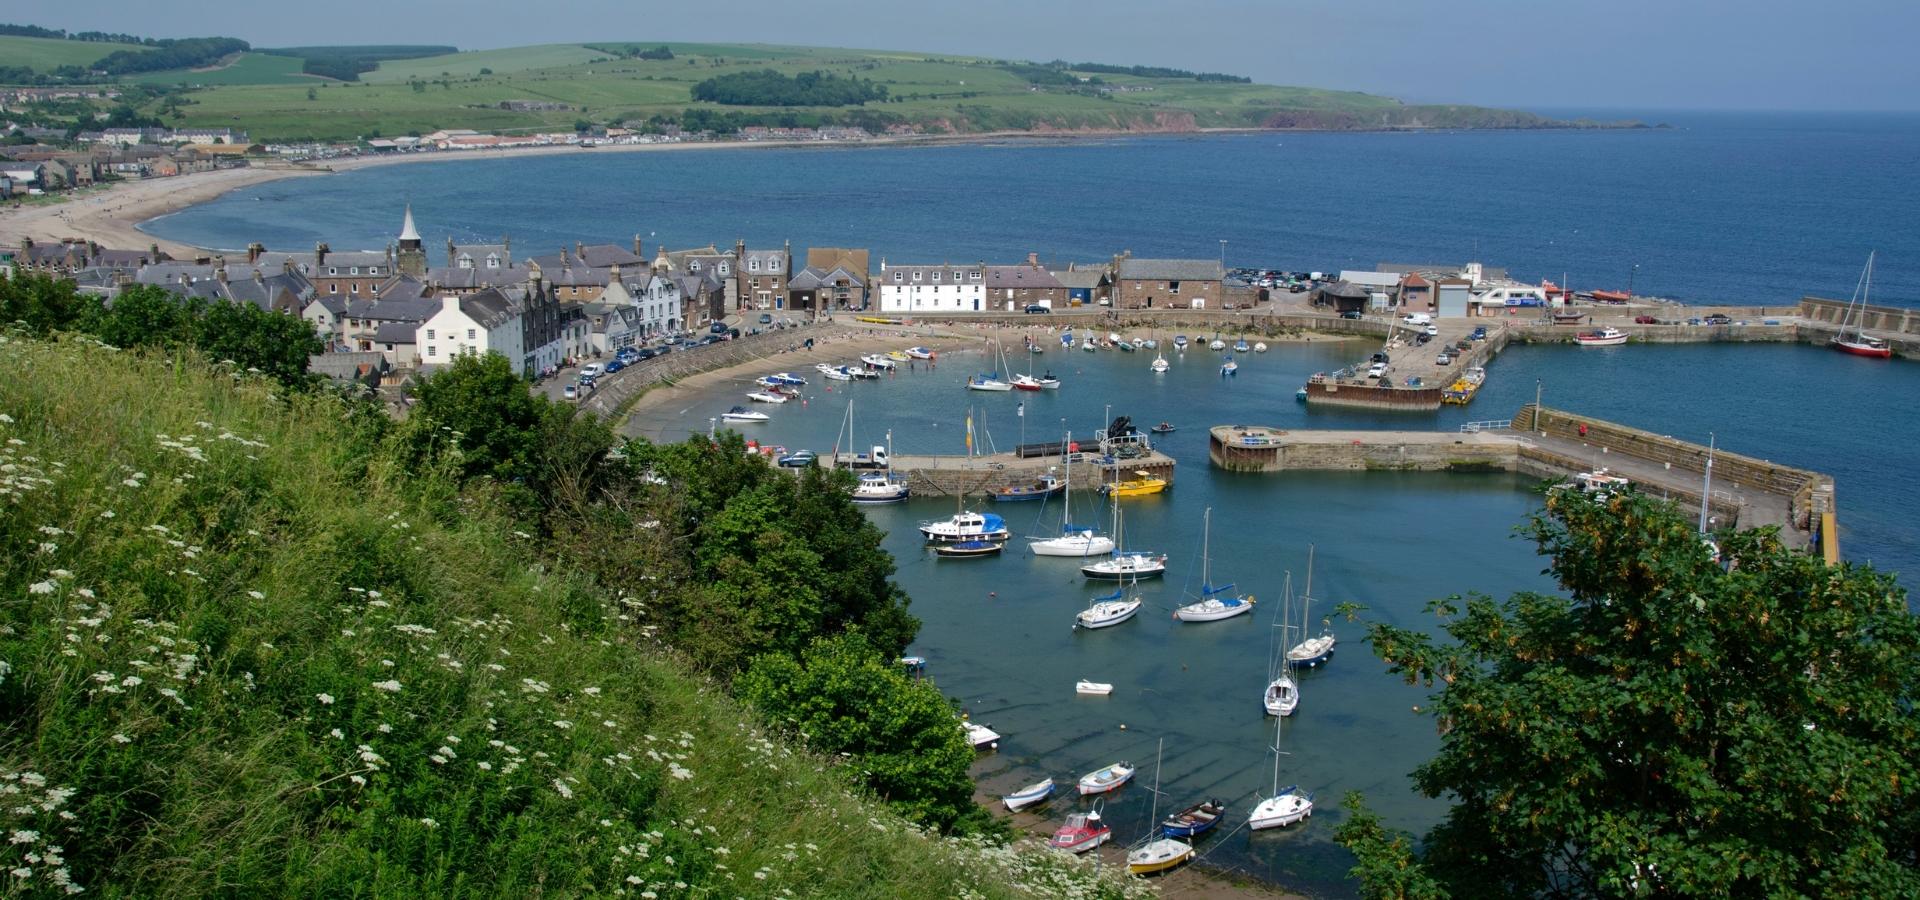 Image looking down over Stonehaven harbour.